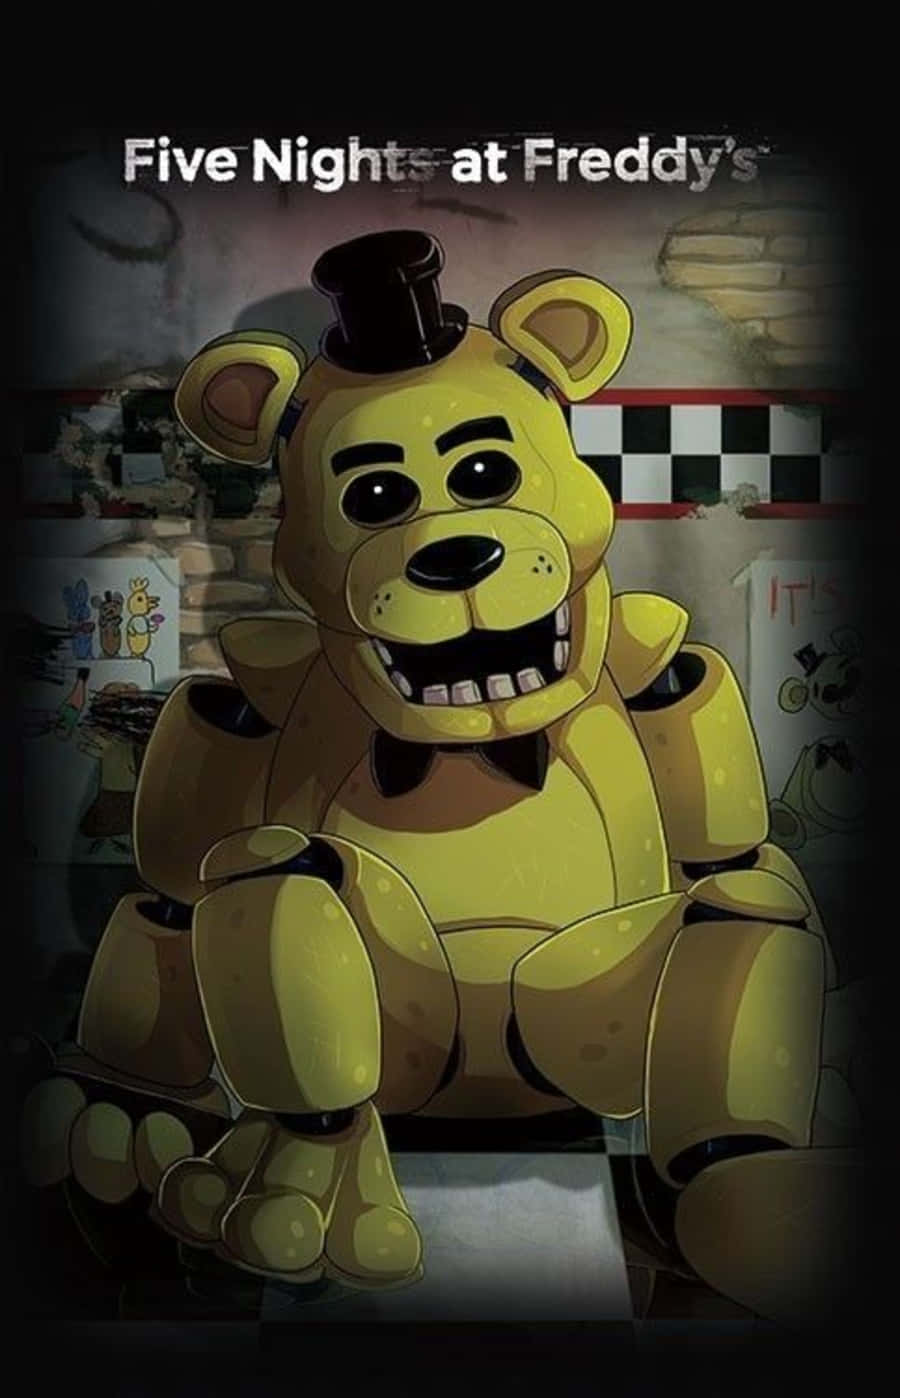 Mysterious Golden Freddy lurking in the shadows Wallpaper